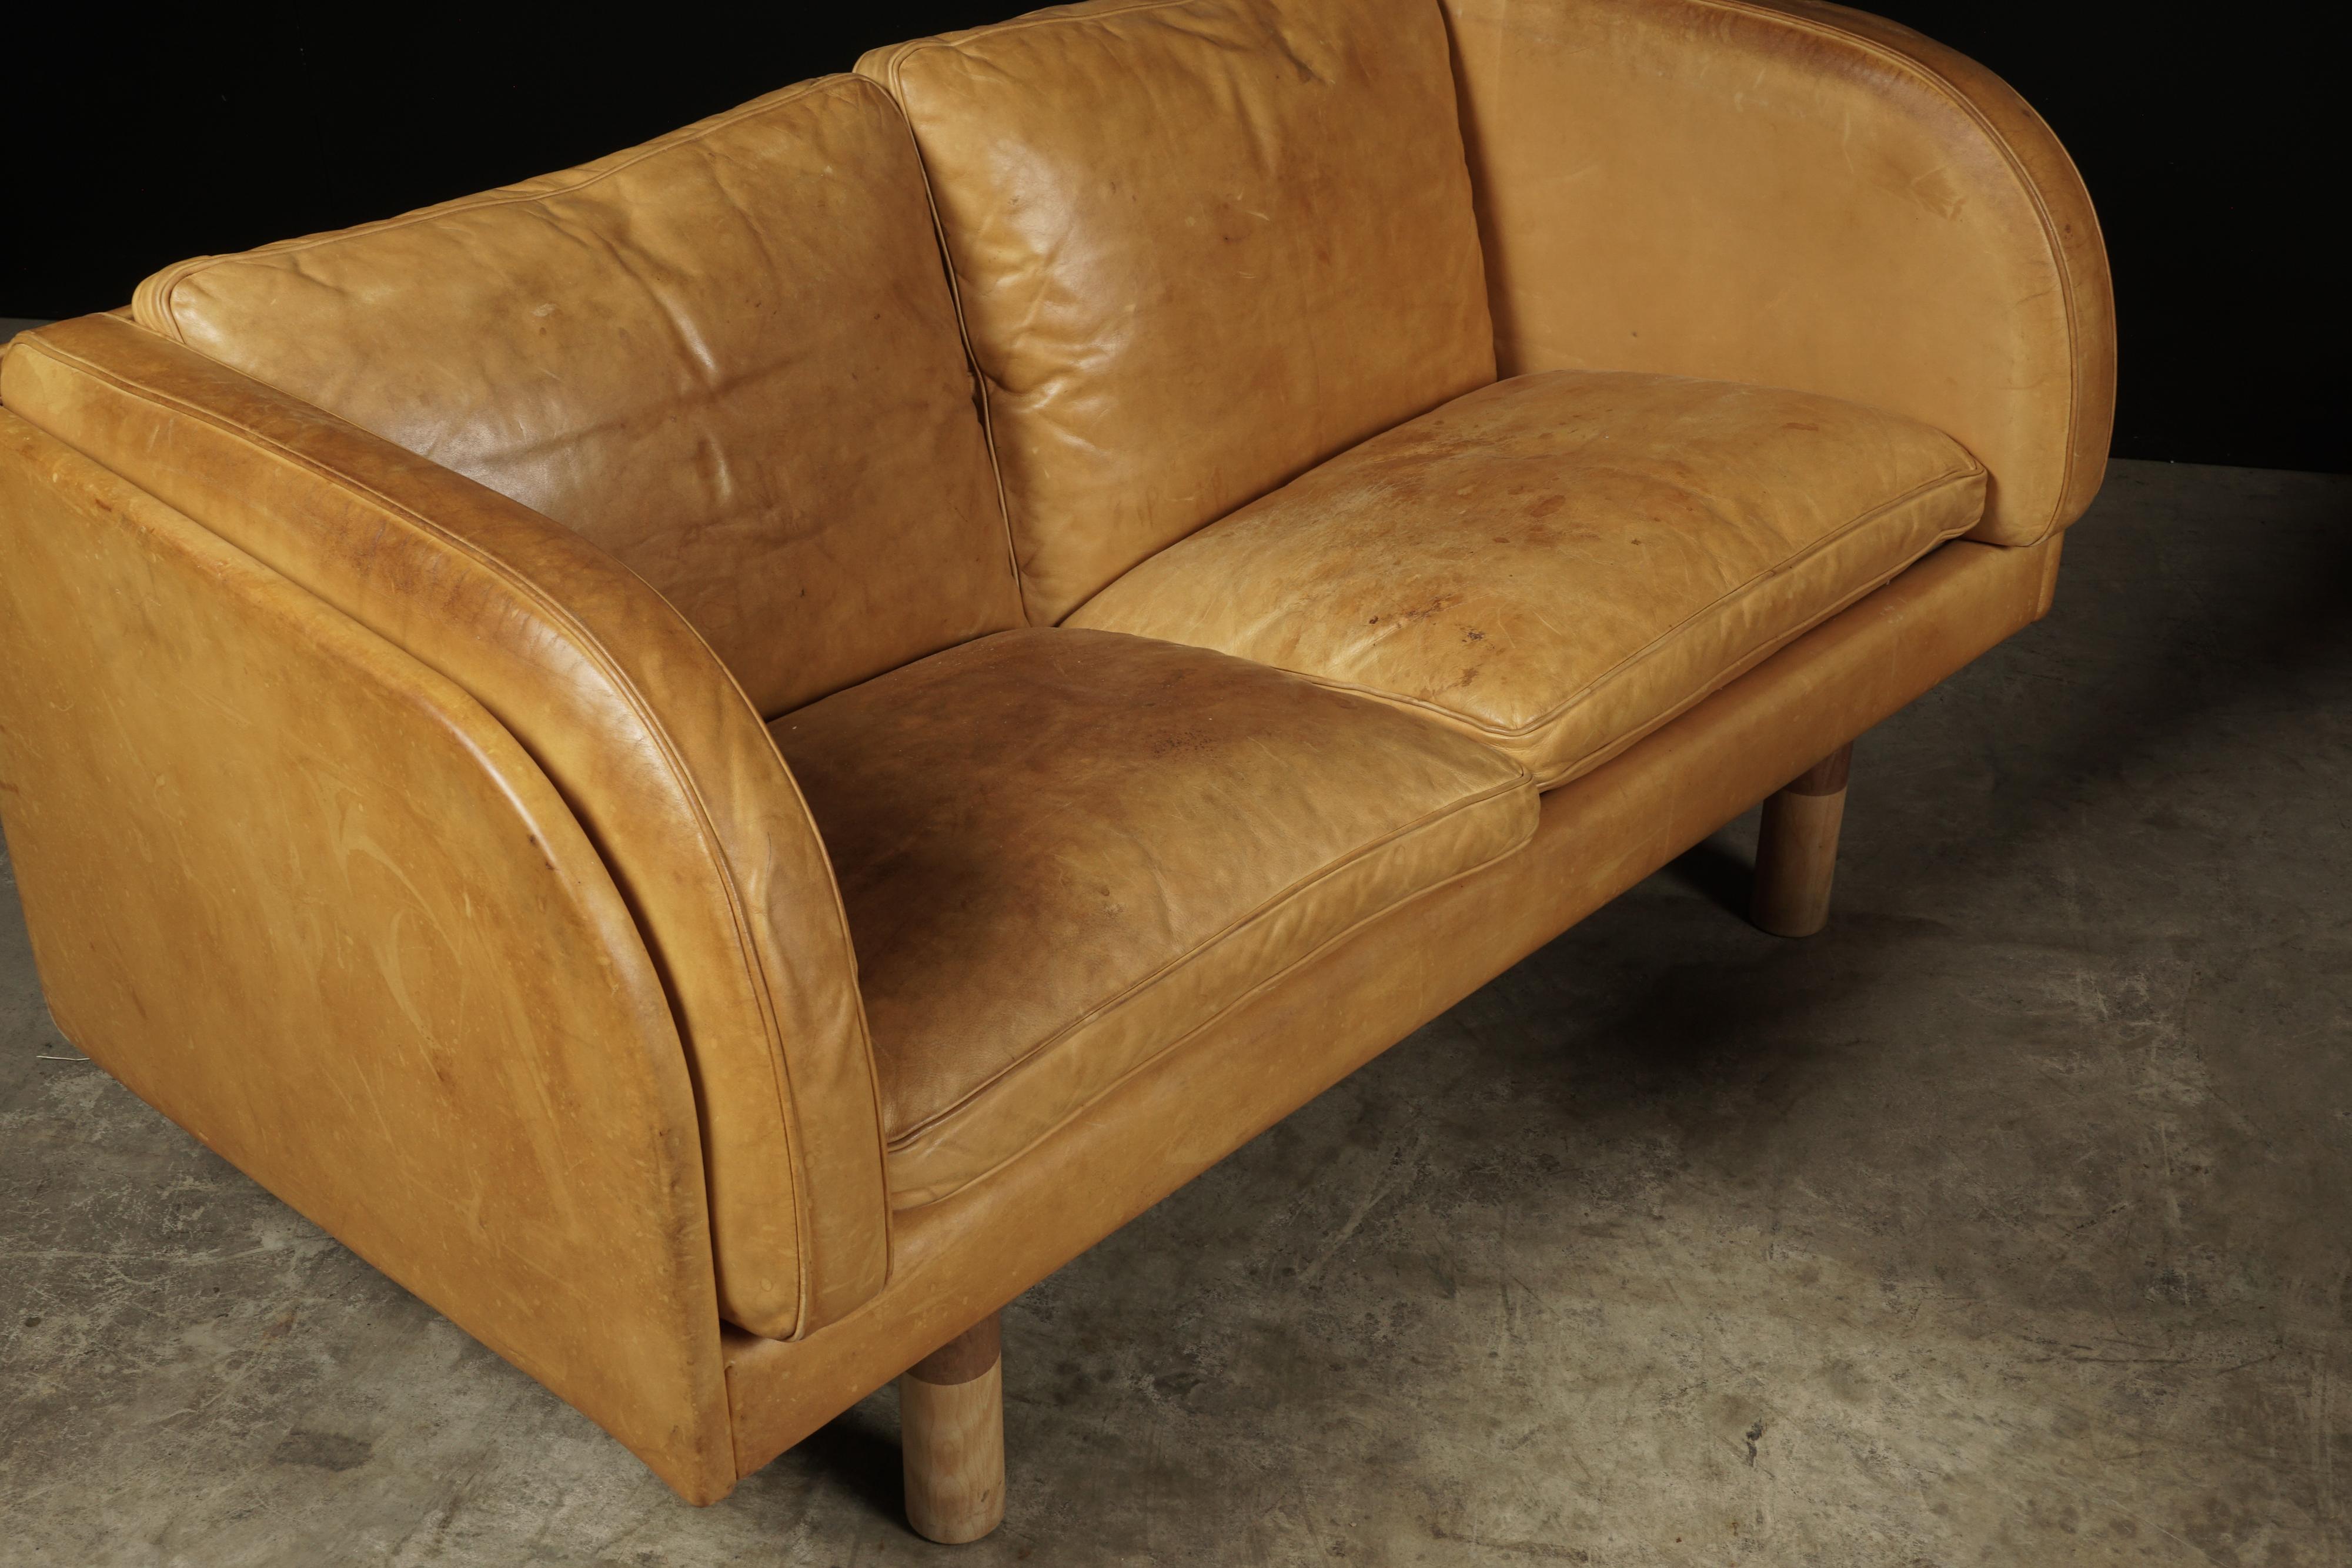 Late 20th Century Rare Pair of Two-Seat Sofas in Cognac Leather Designed by Jørgen Gammelgaard